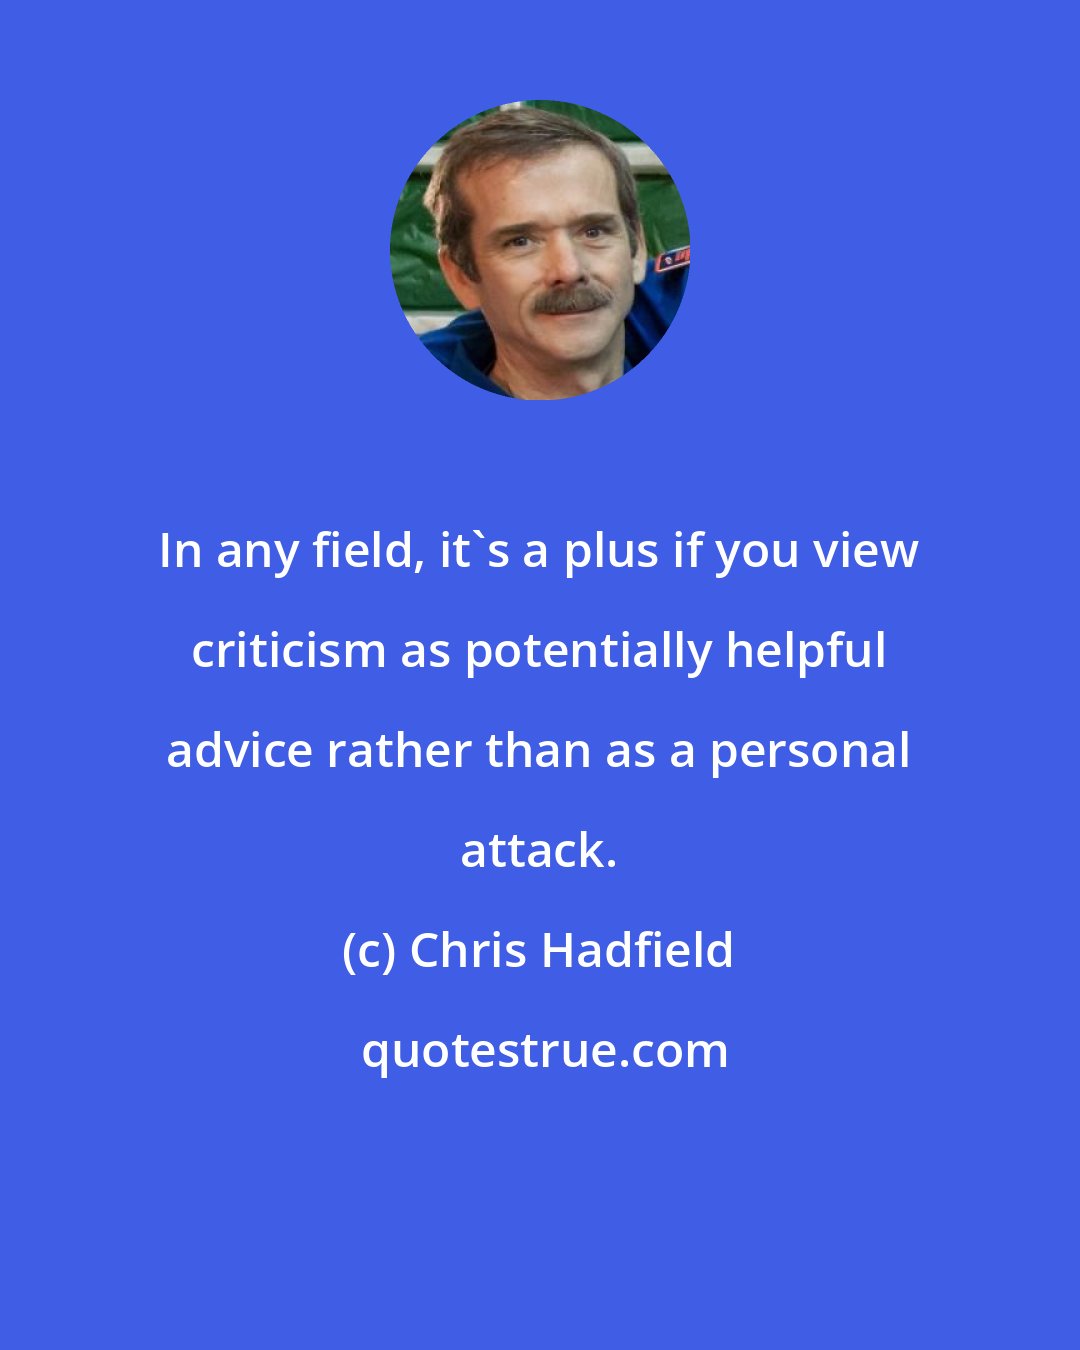 Chris Hadfield: In any field, it's a plus if you view criticism as potentially helpful advice rather than as a personal attack.